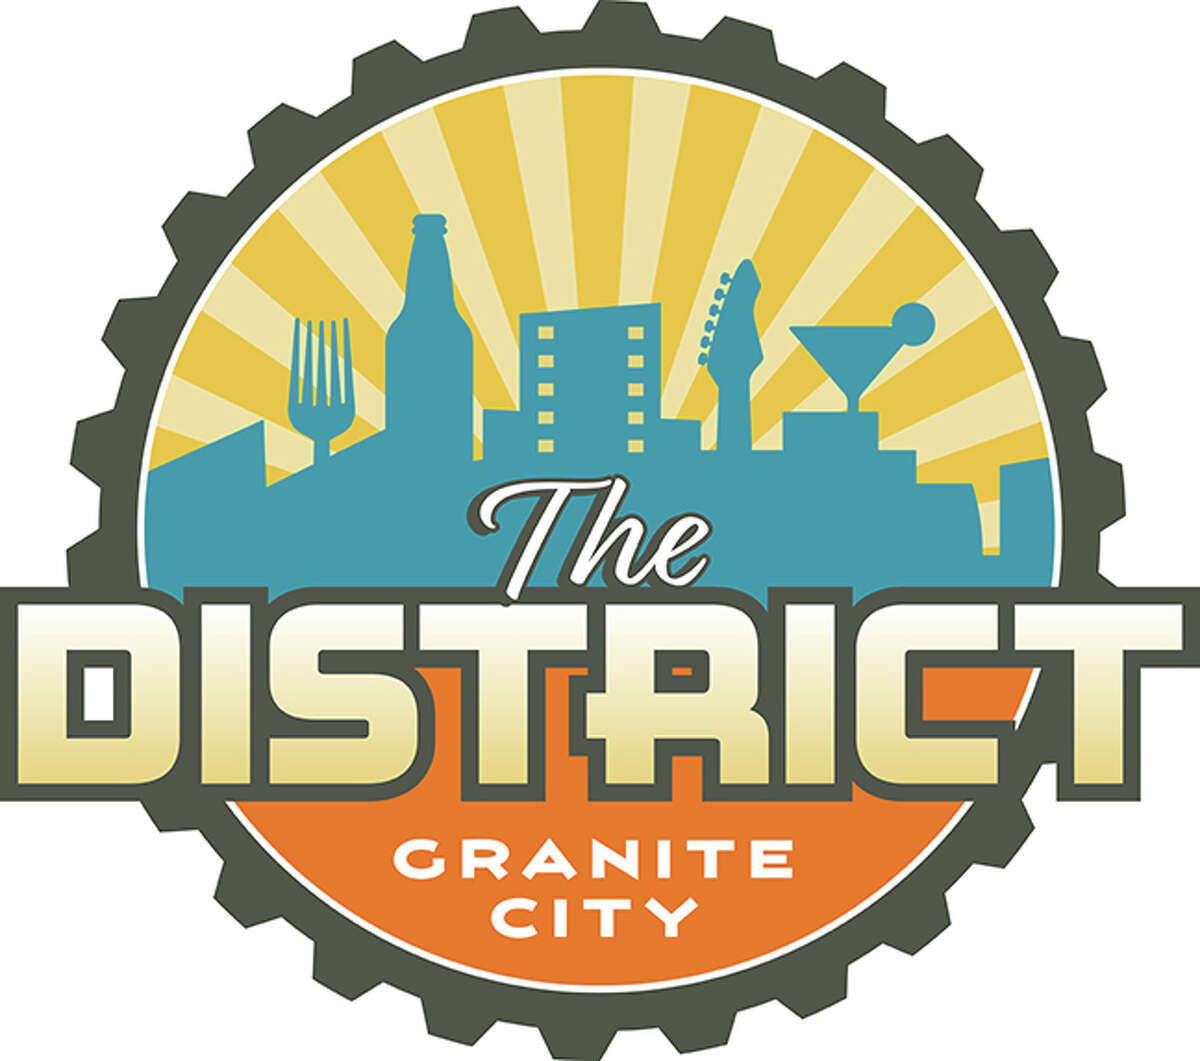 This is the logo for The District, the new arts and entertainment area in downtown Granite City. The District is part of an enterprise zone that Mayor Mike Parkinson and city officials are counting on to revitalize the downtown area